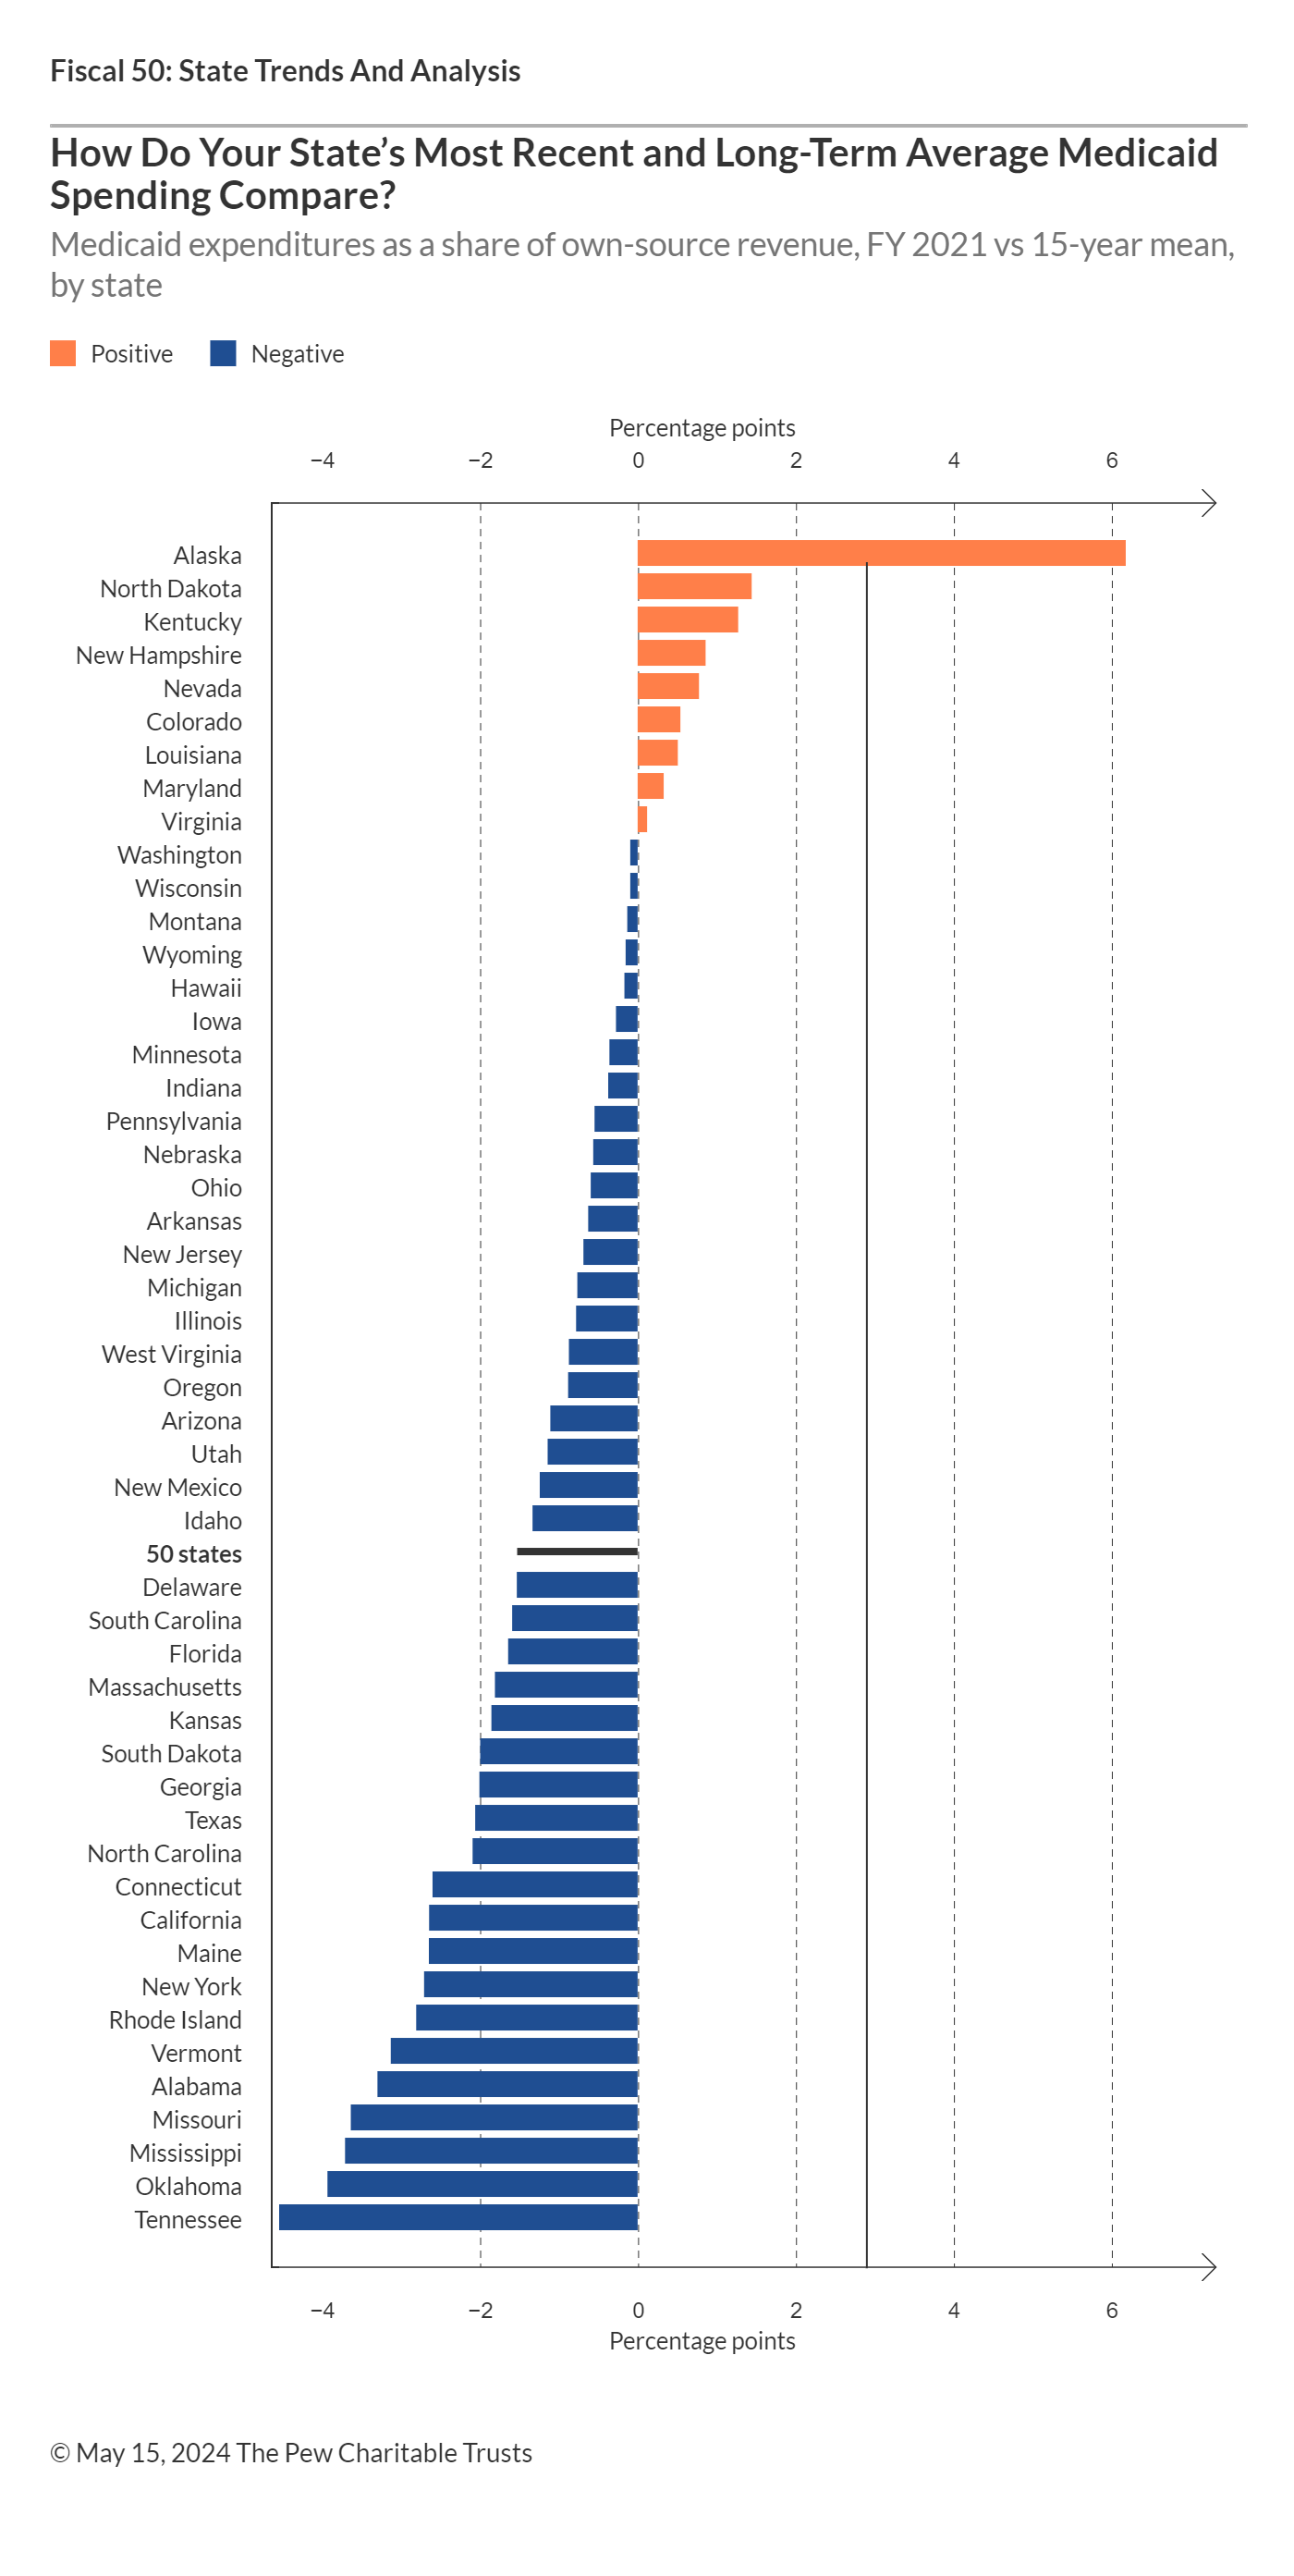 How Do Your State’s Most Recent and Long-Term Average Medicaid Spending Compare?